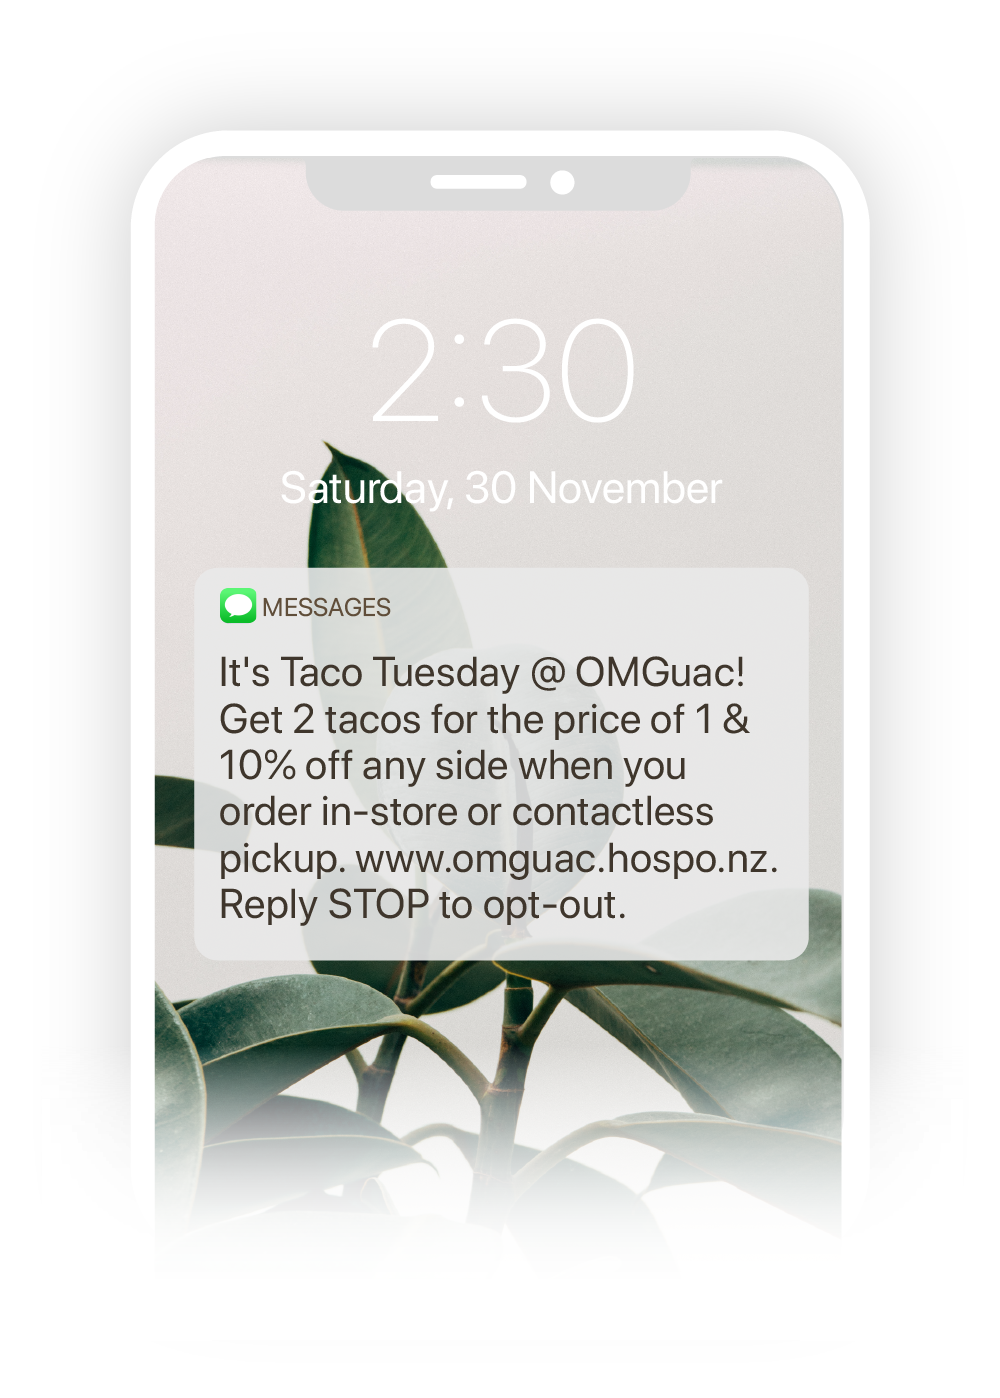 Use SMS campaigns for timely customer marketing with a high open rate